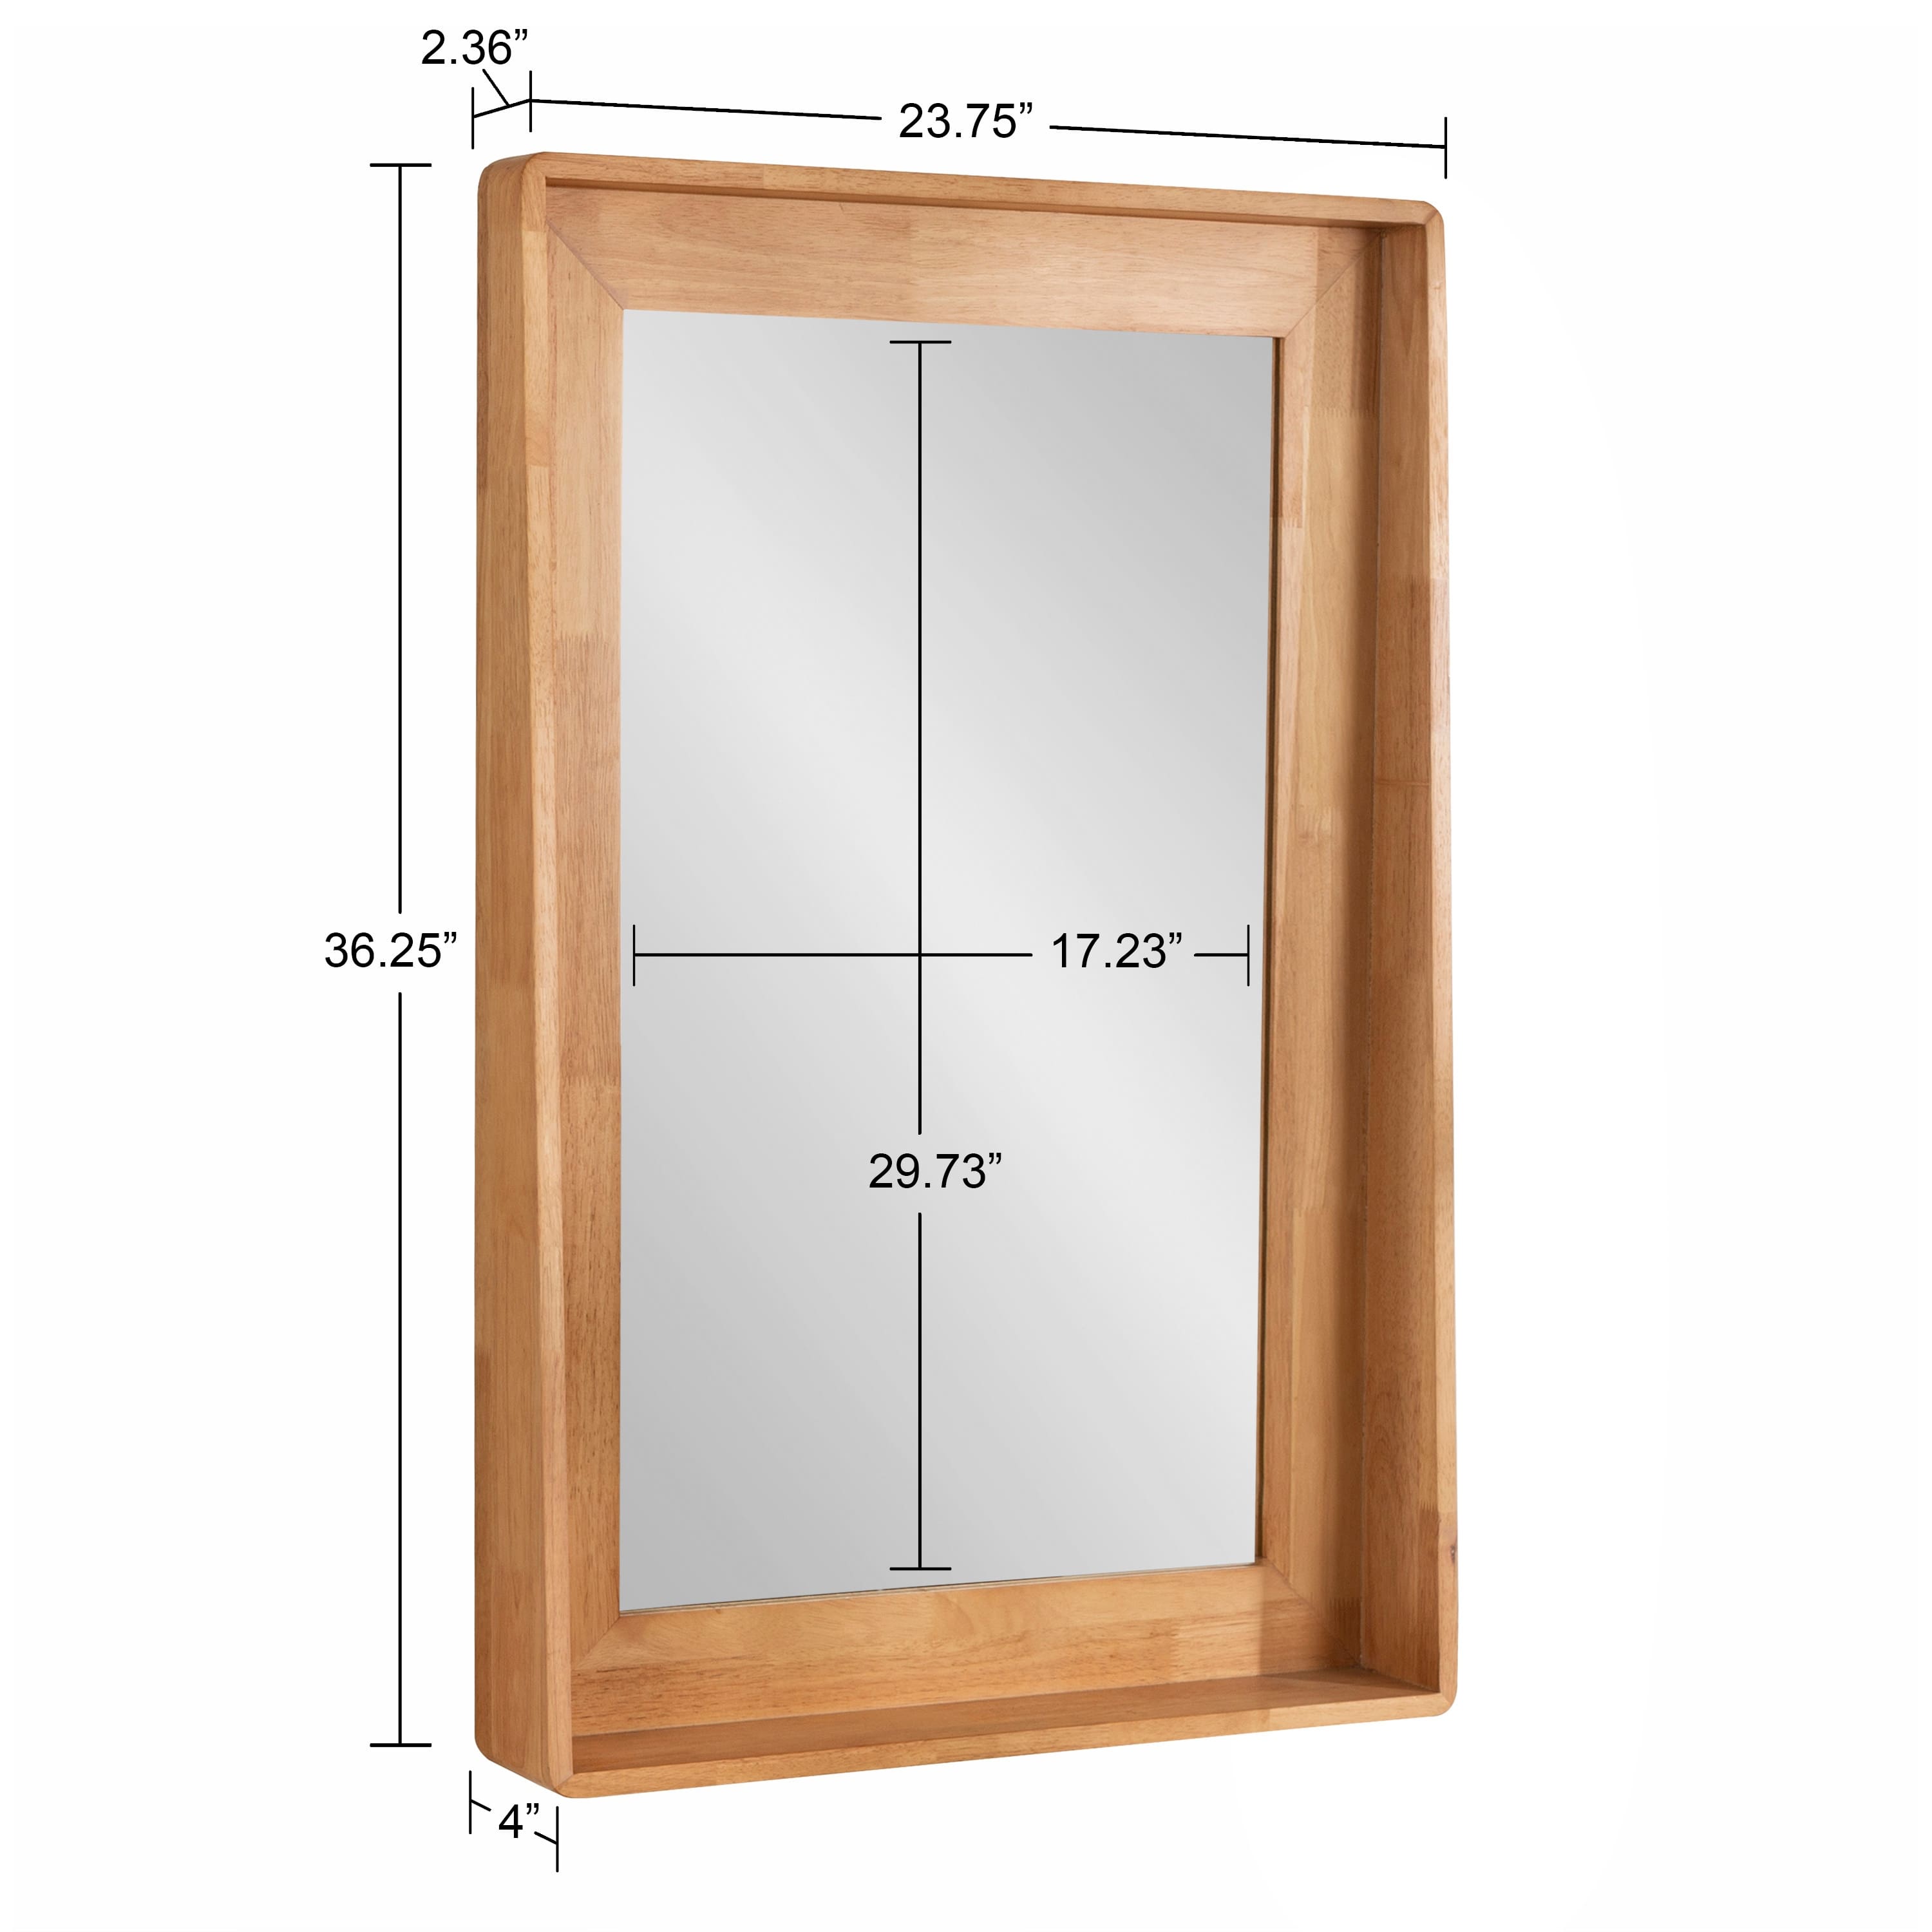 Kate and Laurel Basking Wall Mirror with Shelf